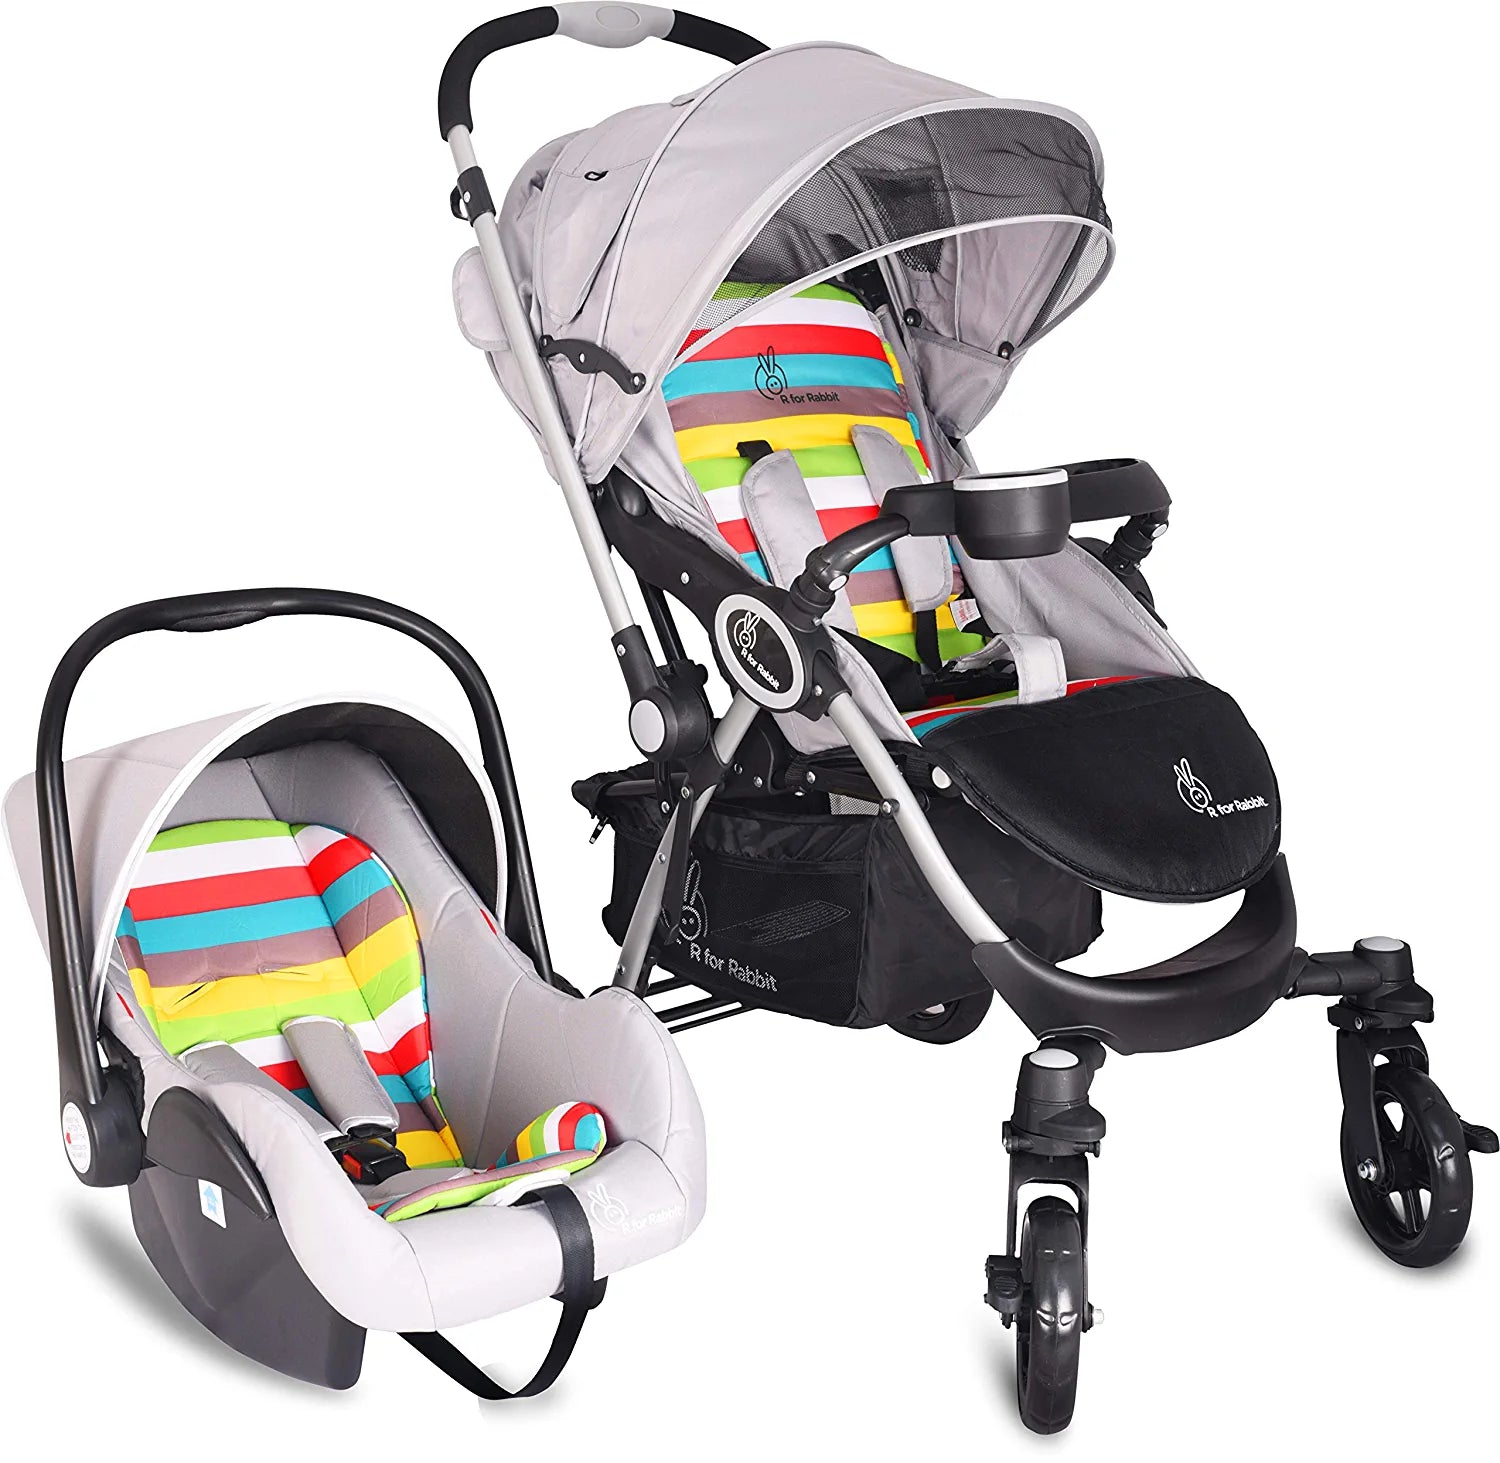 R for Rabbit Travel System Stroller with Car Seat